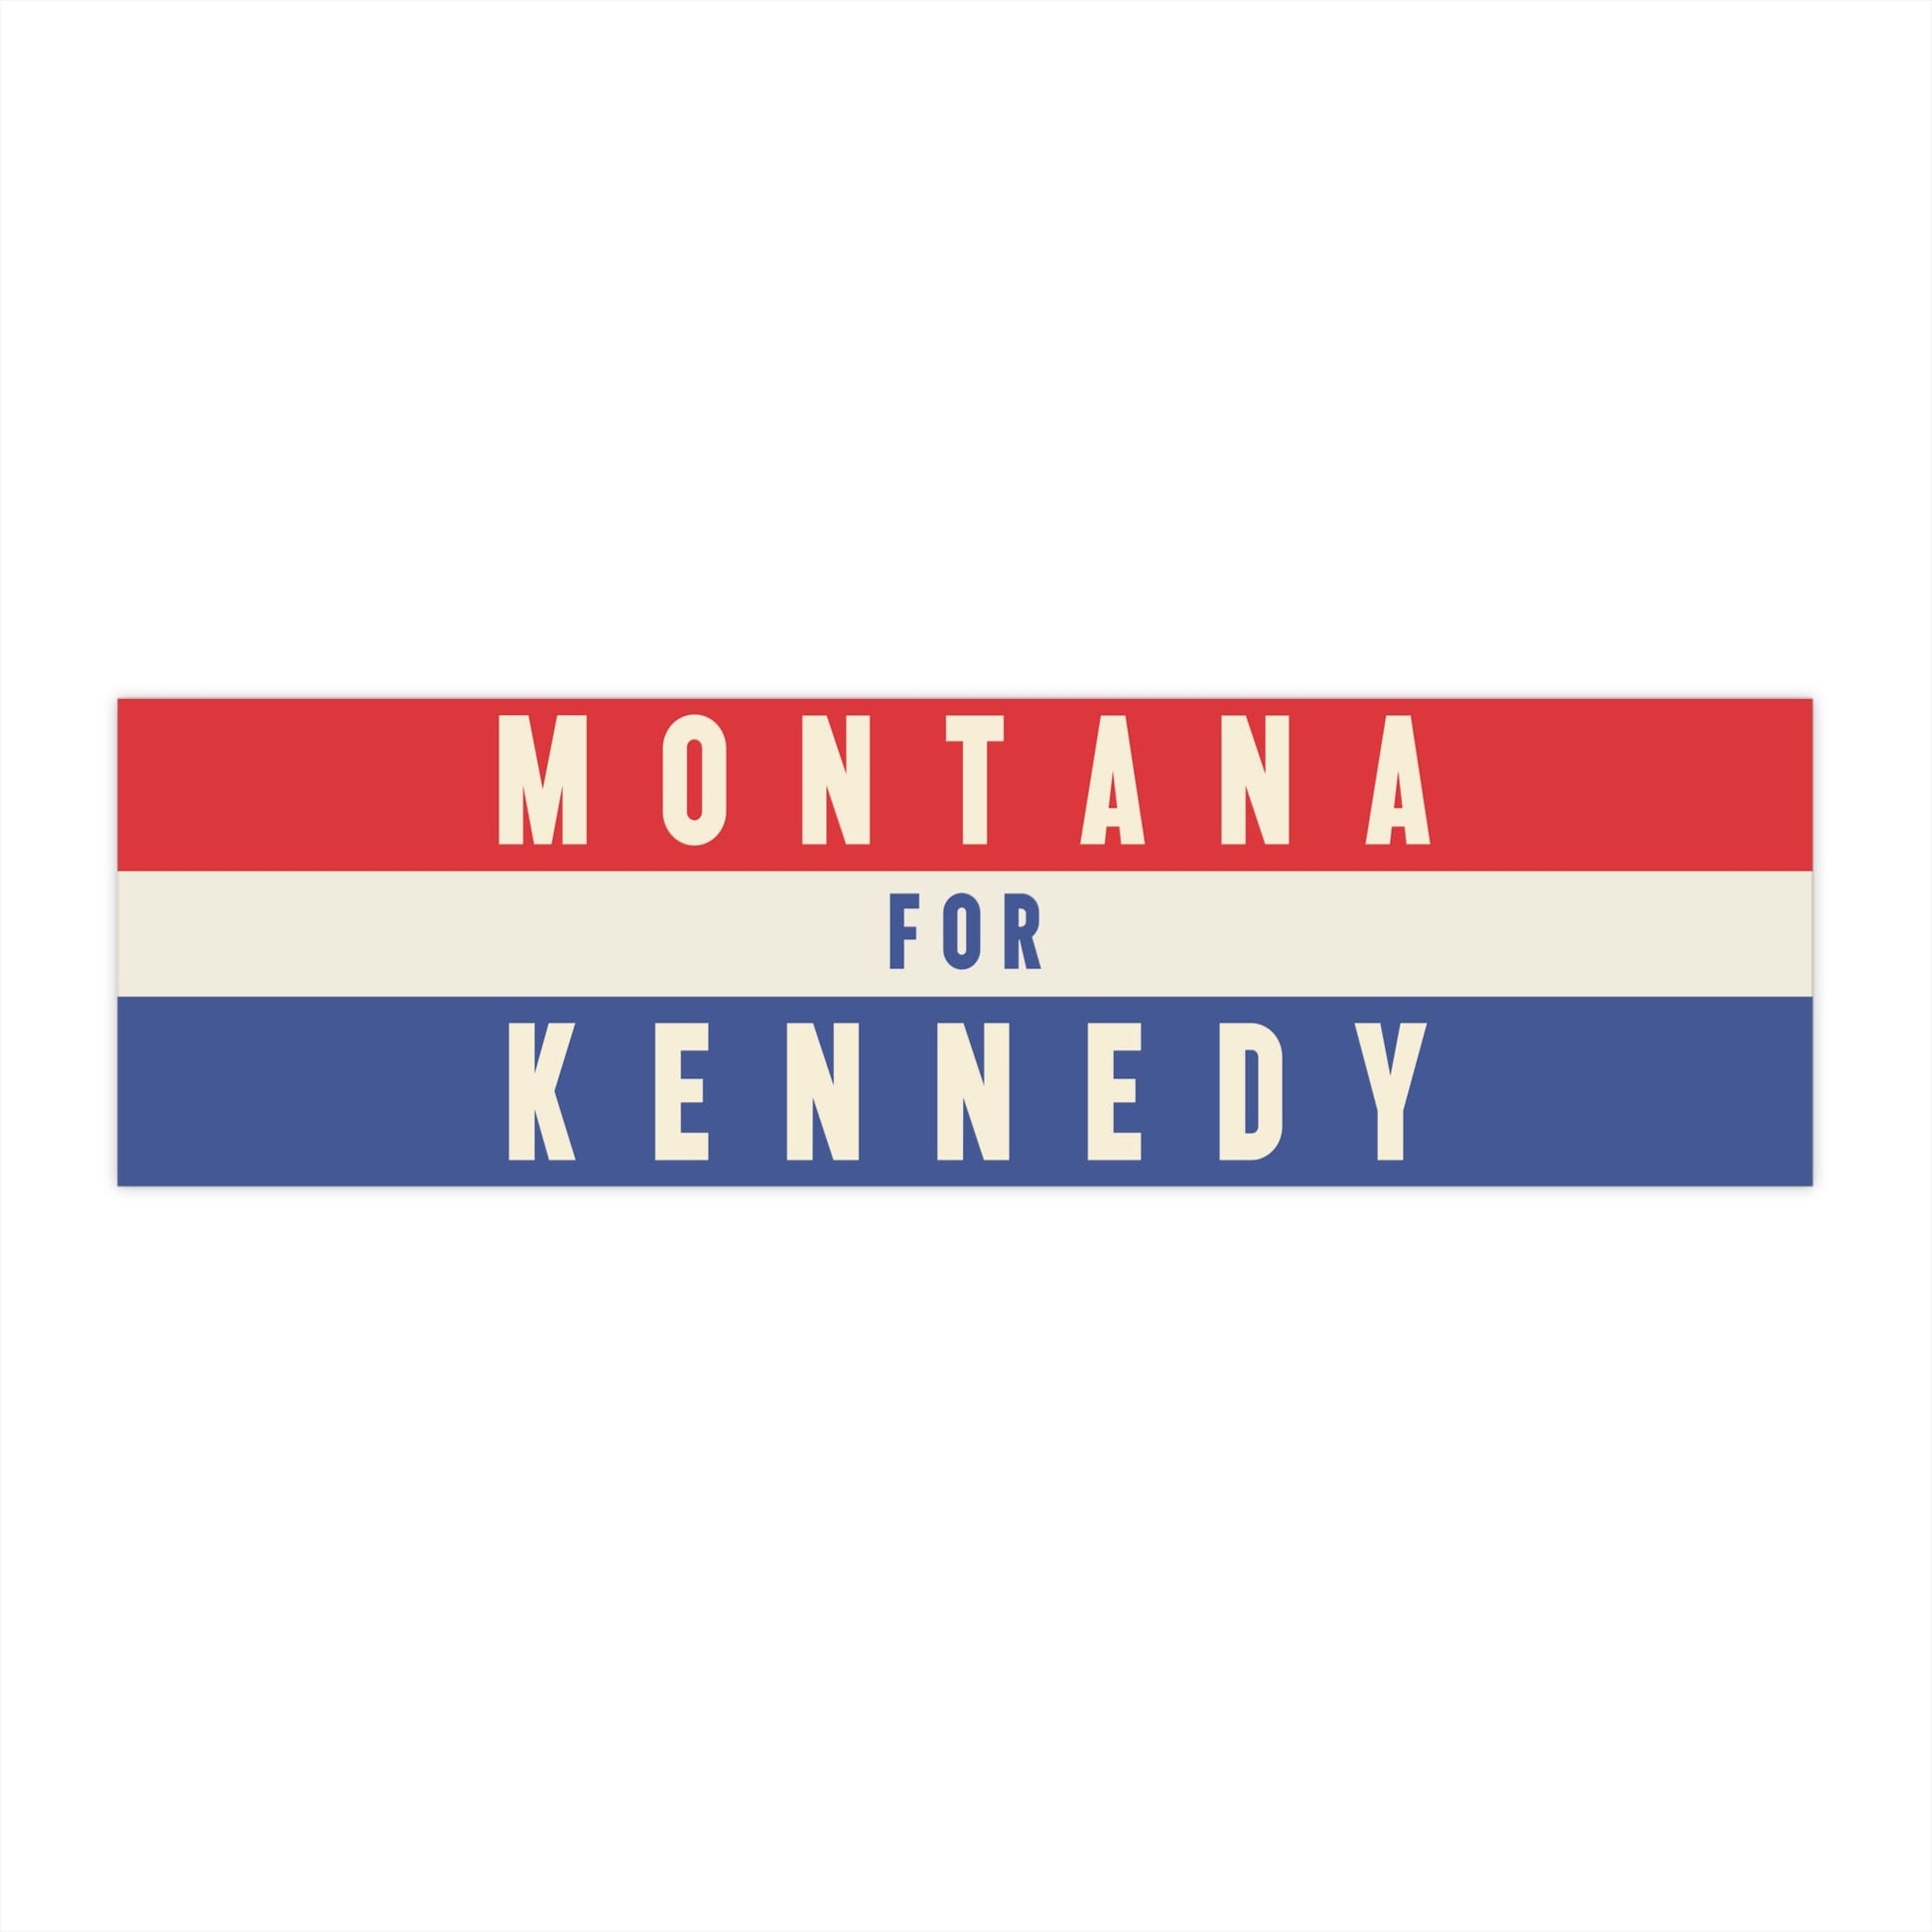 Montana for Kennedy Bumper Sticker - TEAM KENNEDY. All rights reserved